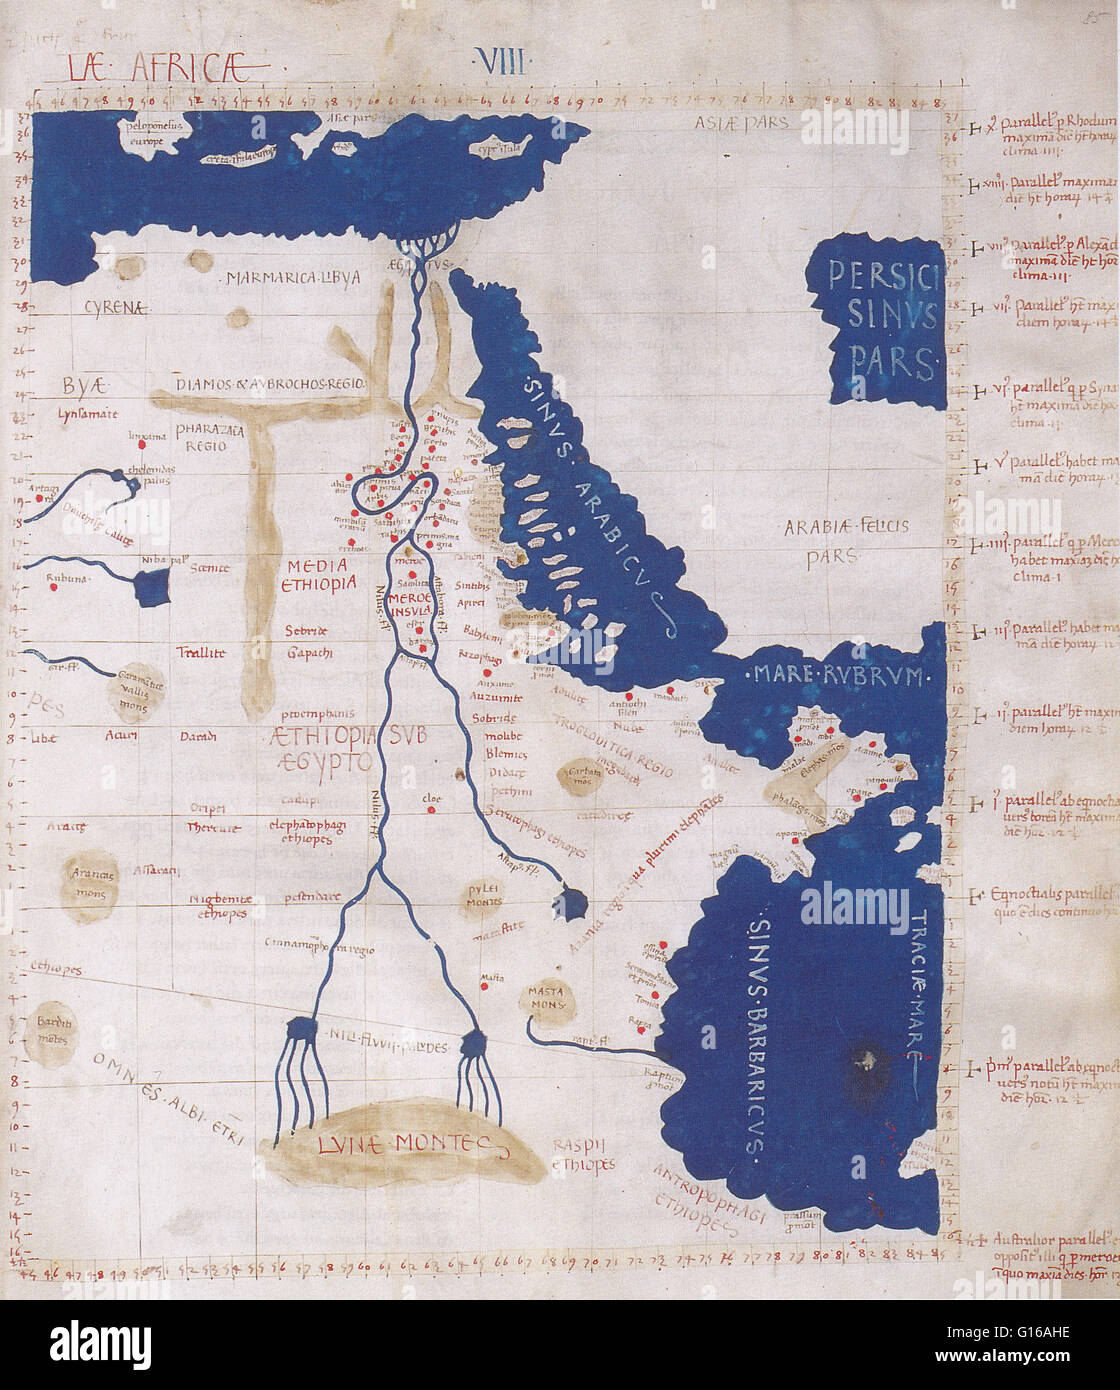 Ptolemy's map of the Nile was based on the description contained in Ptolemy's book Geographia, written 150 AD. Although authentic maps have never been found, the Geographia contains thousands of references to various parts of the old world, with coordinat Stock Photo